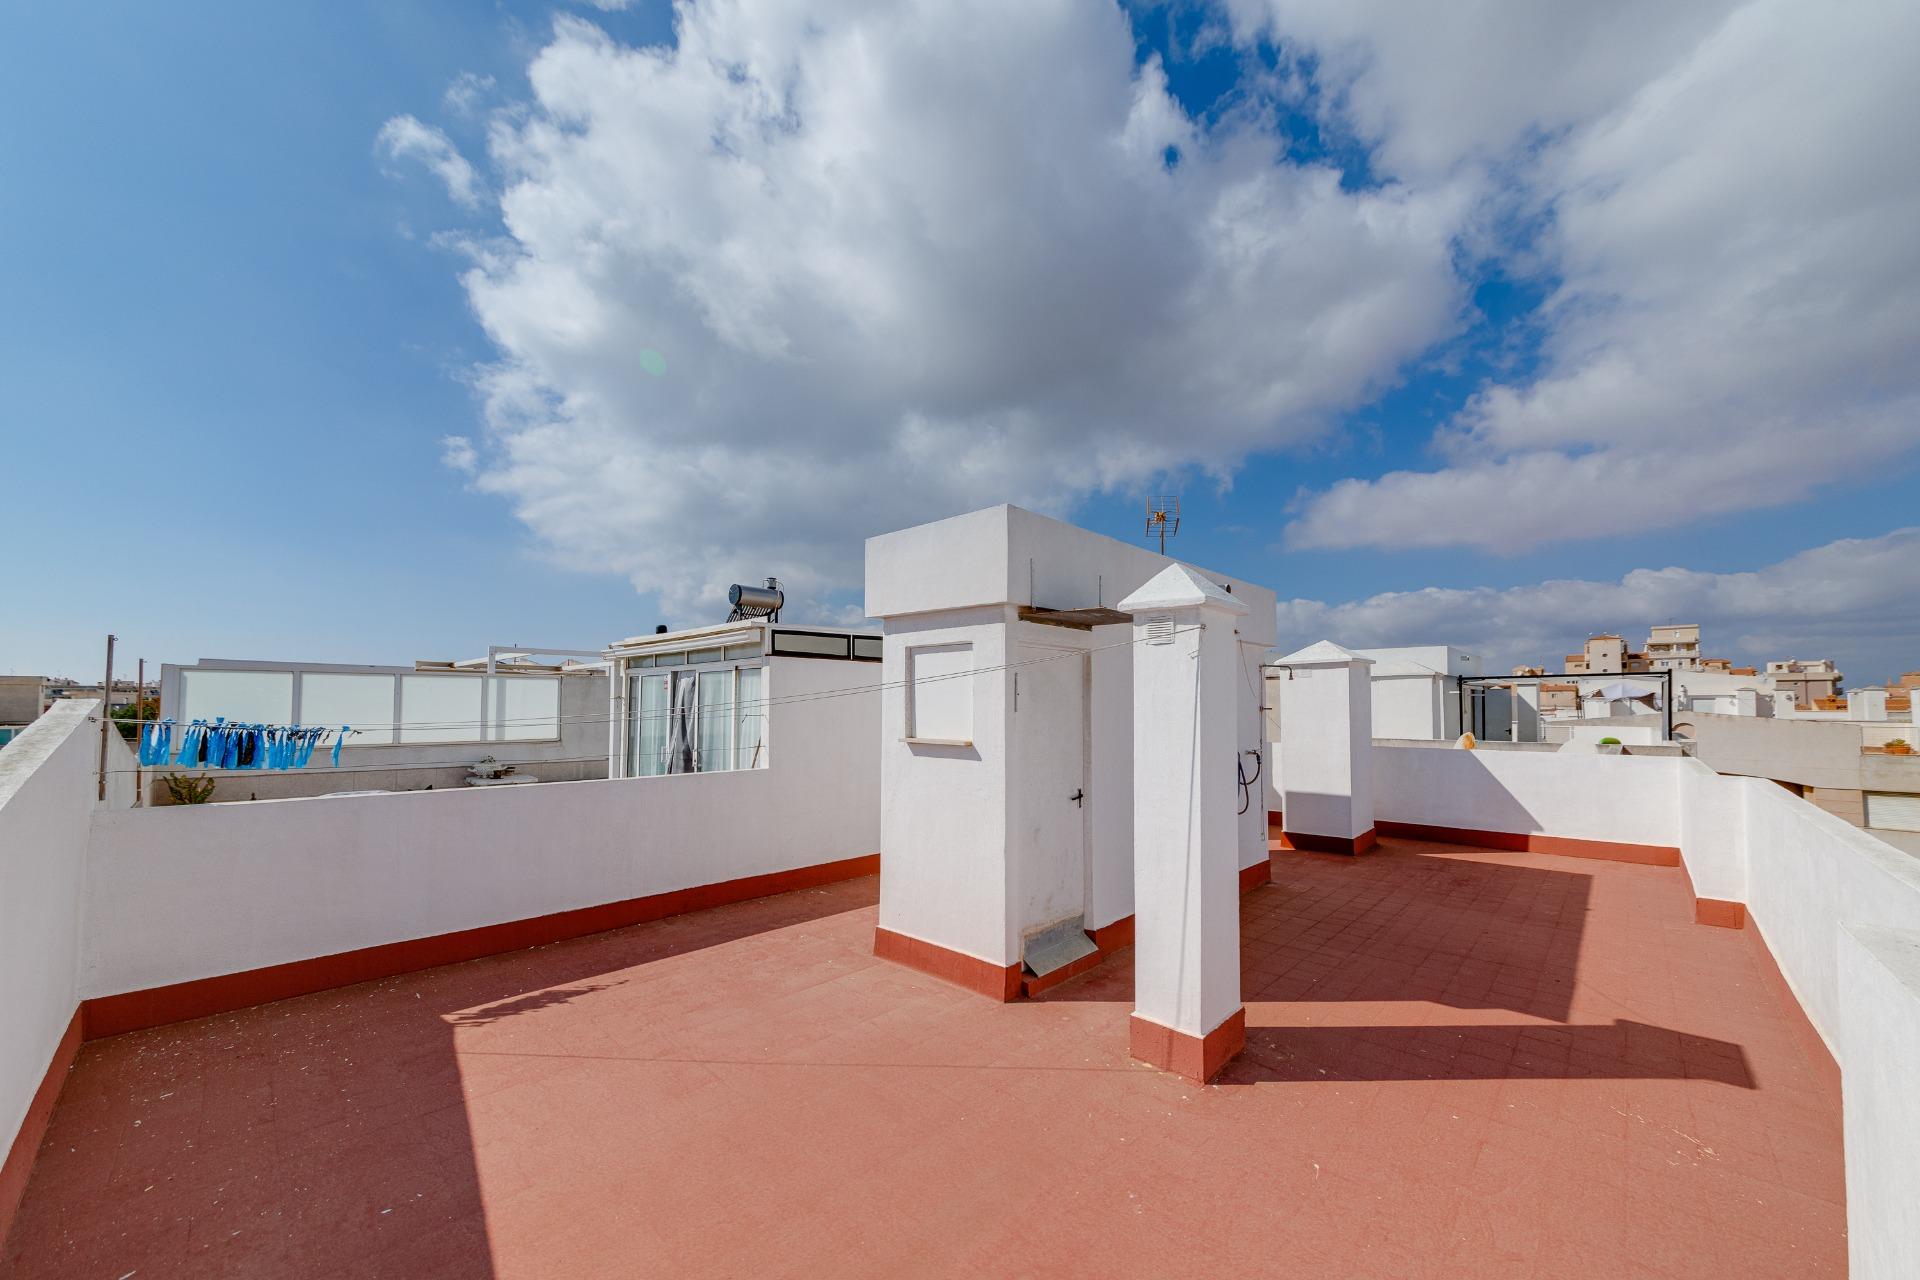 Penthouse with roof terrace for sale near Los Locos beach and promenade in Torrevieja.